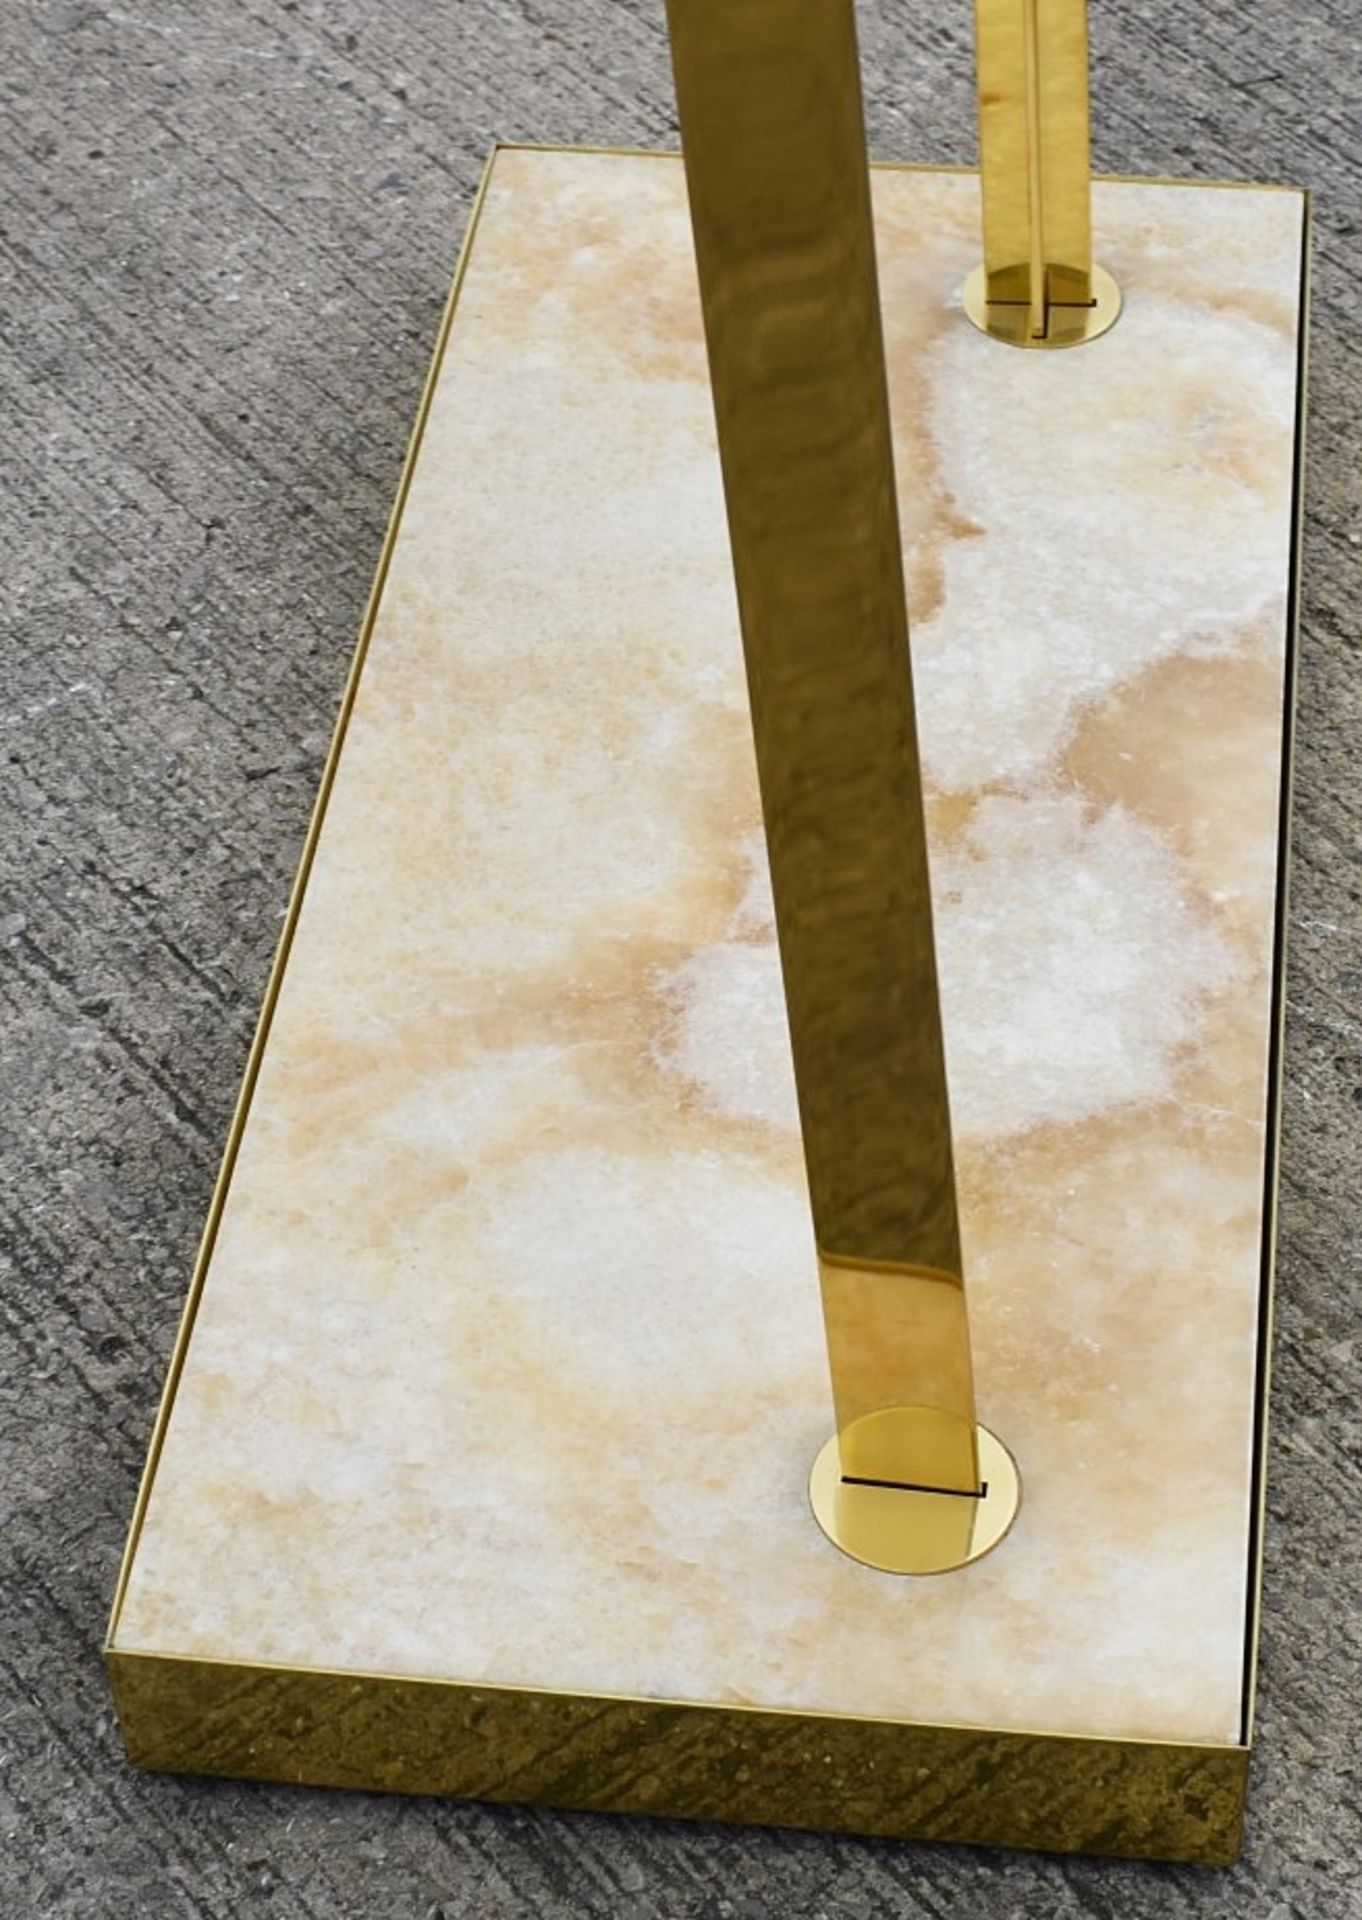 1 x Opulent Garment Rail from a Versace Retail Display Featuring a Marble Base, Curved Design and - Image 8 of 9